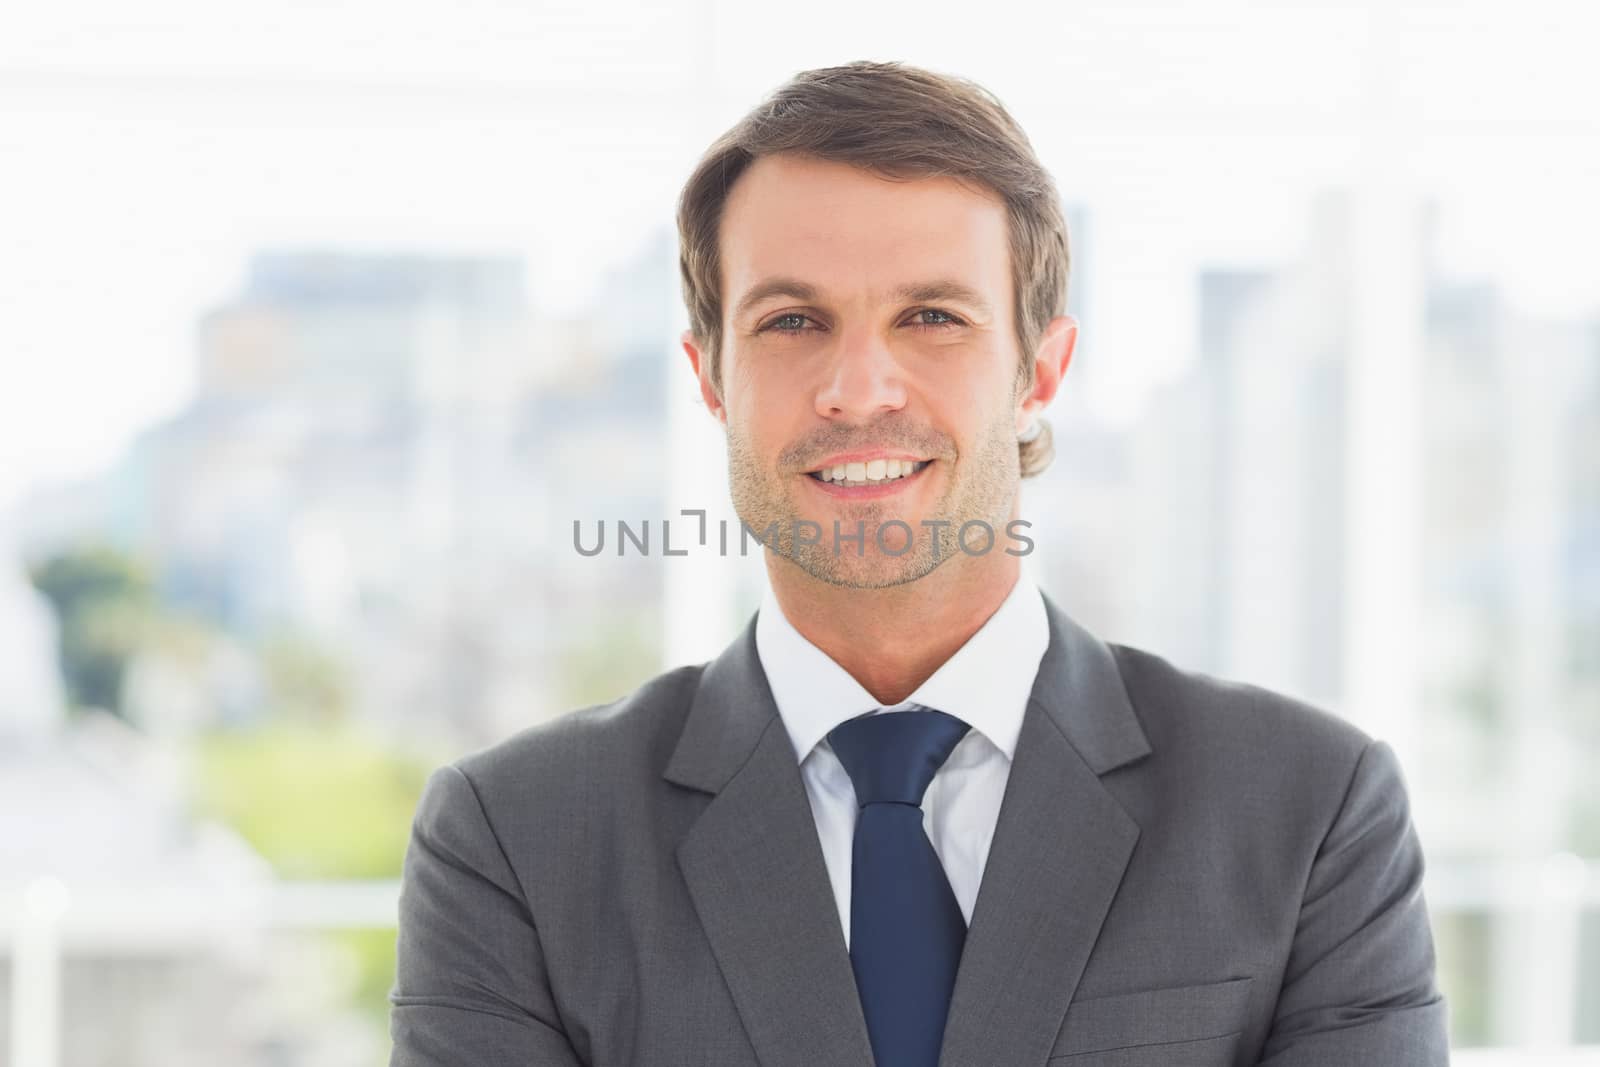 Portrait of a young businessman standing over blurred background outdoors